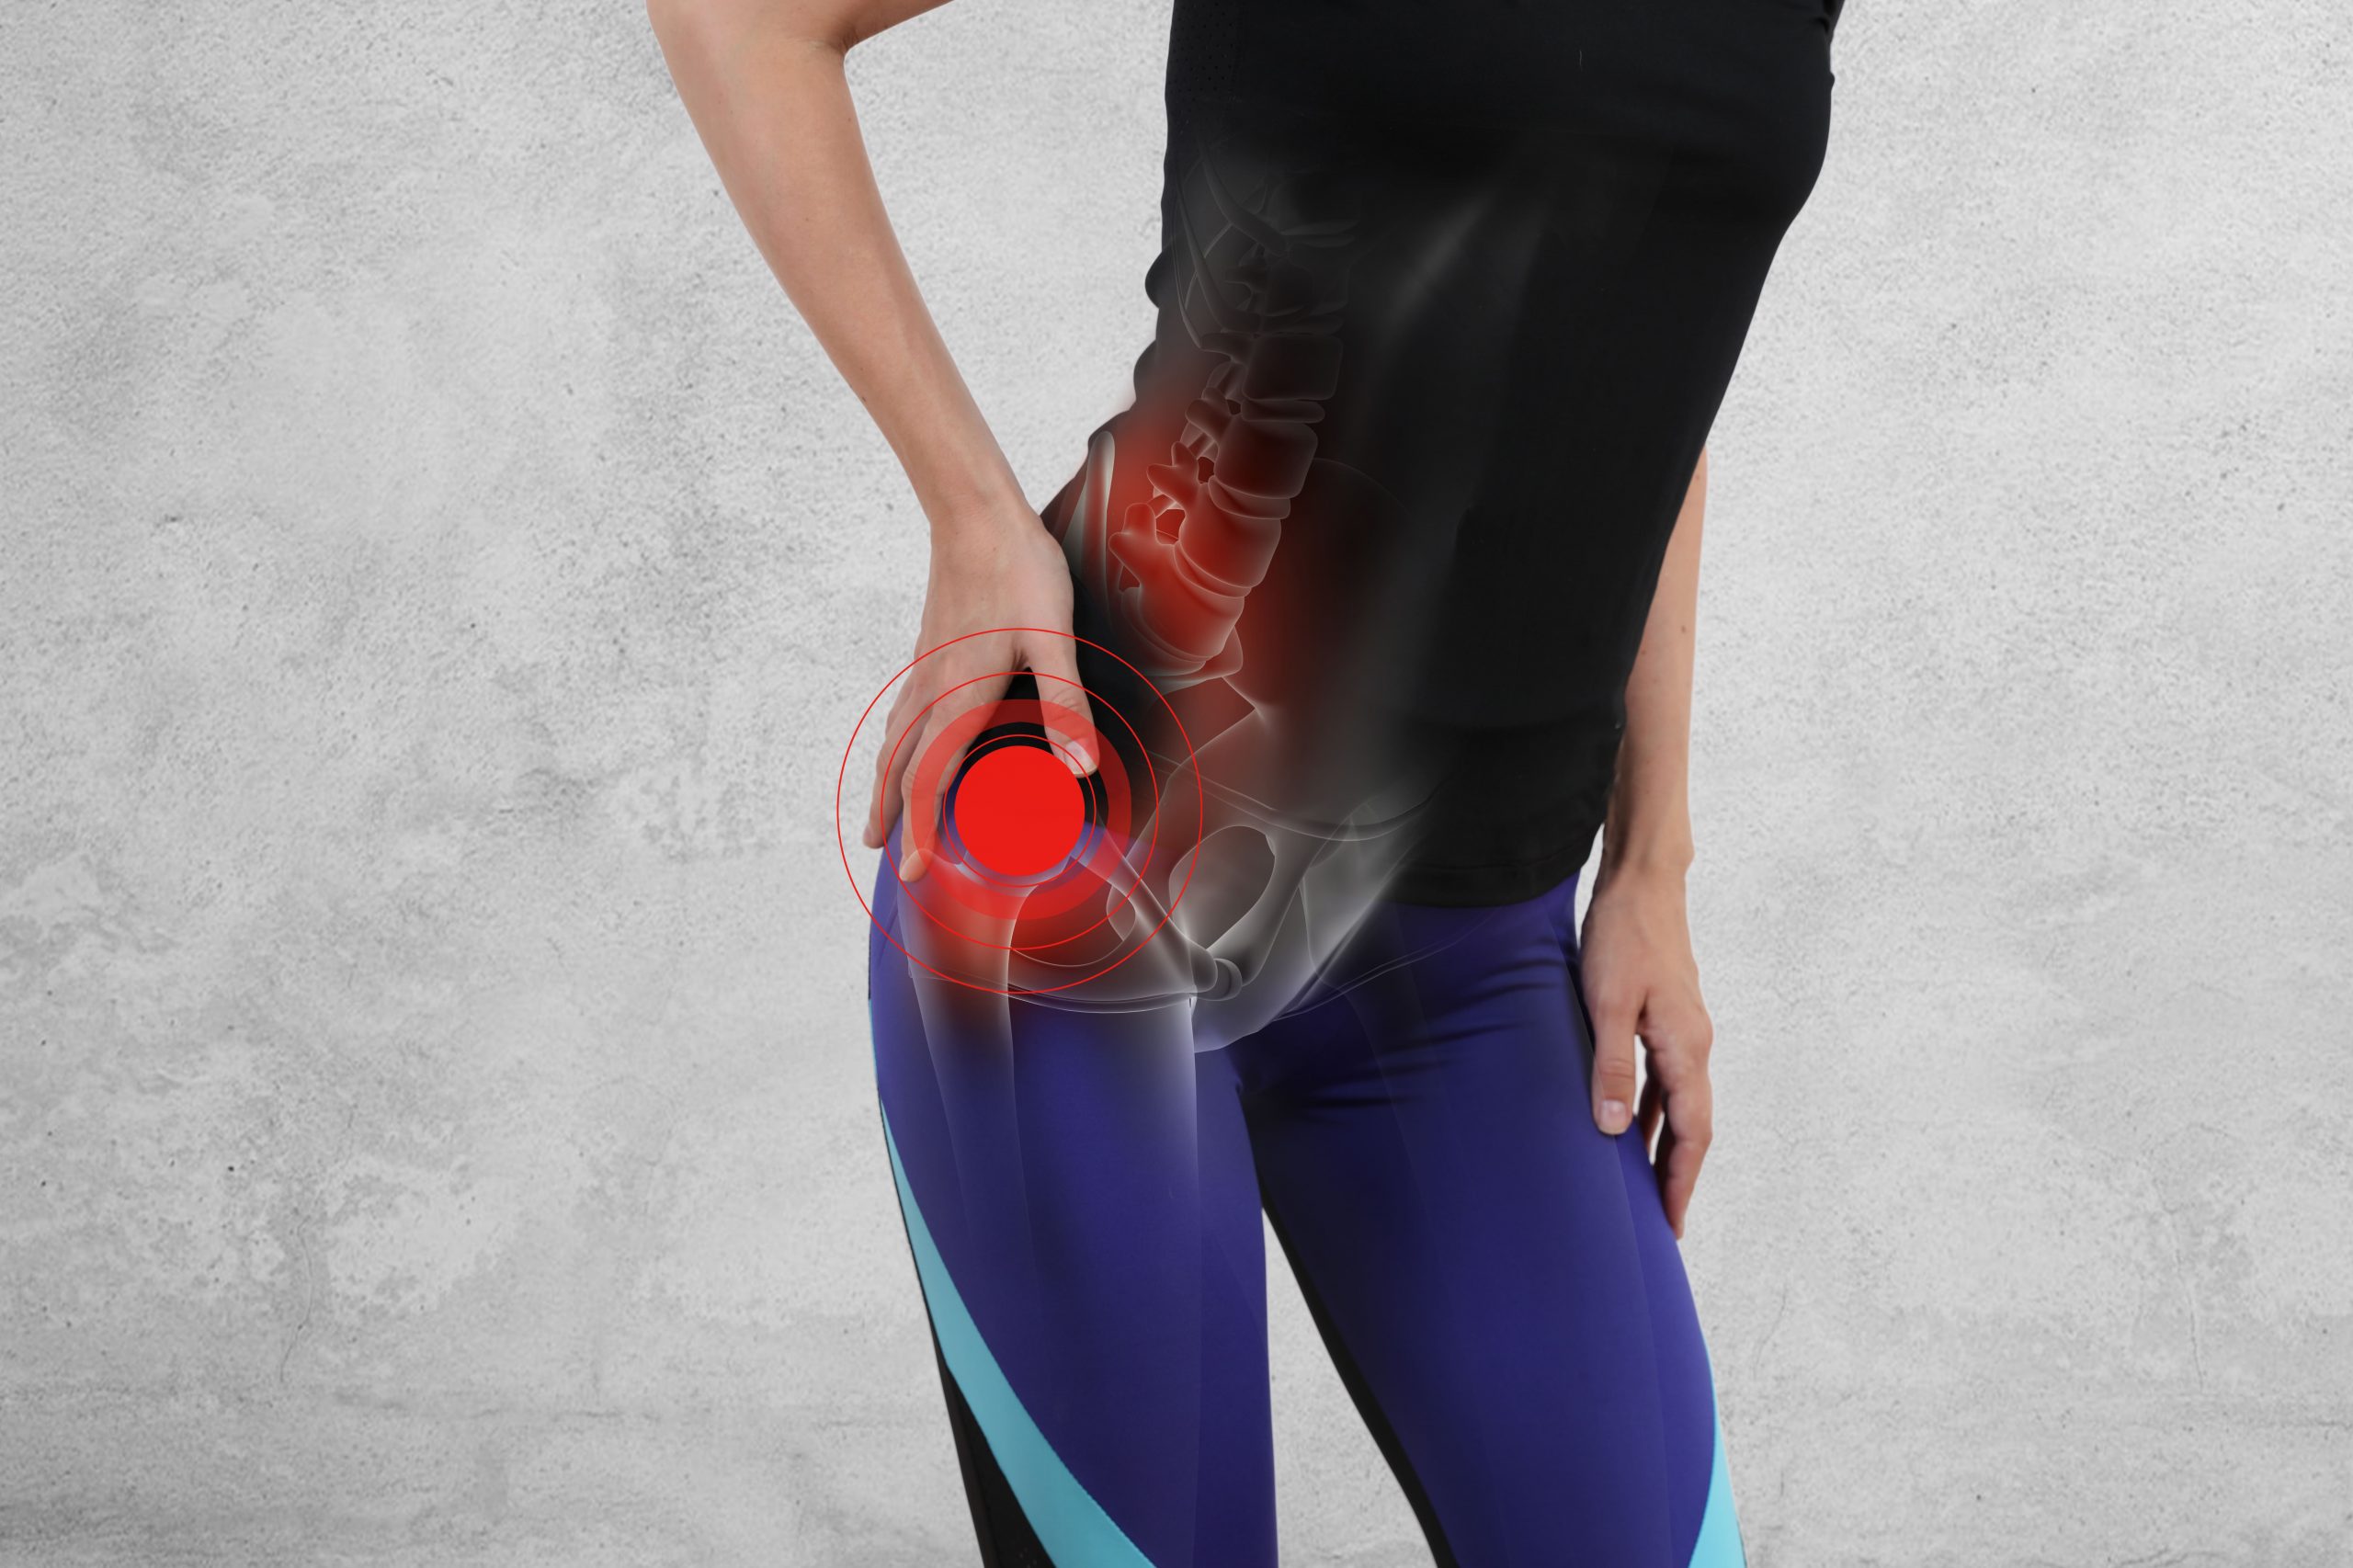 How to Get Rid of Hip Pain